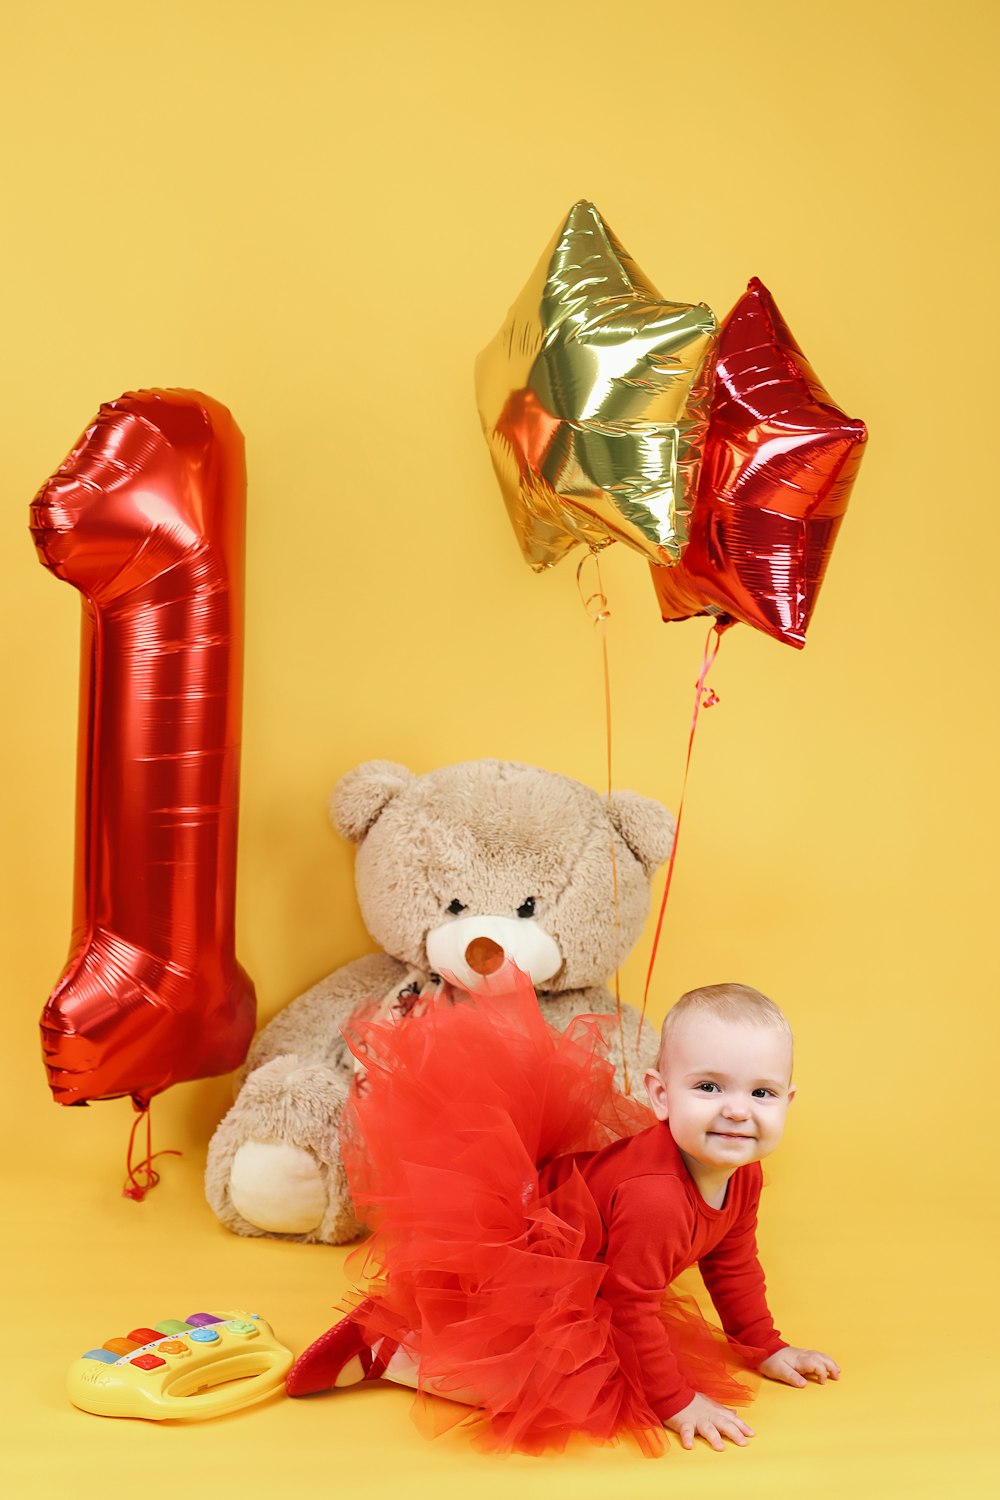 a baby sitting next to a teddy bear and balloons